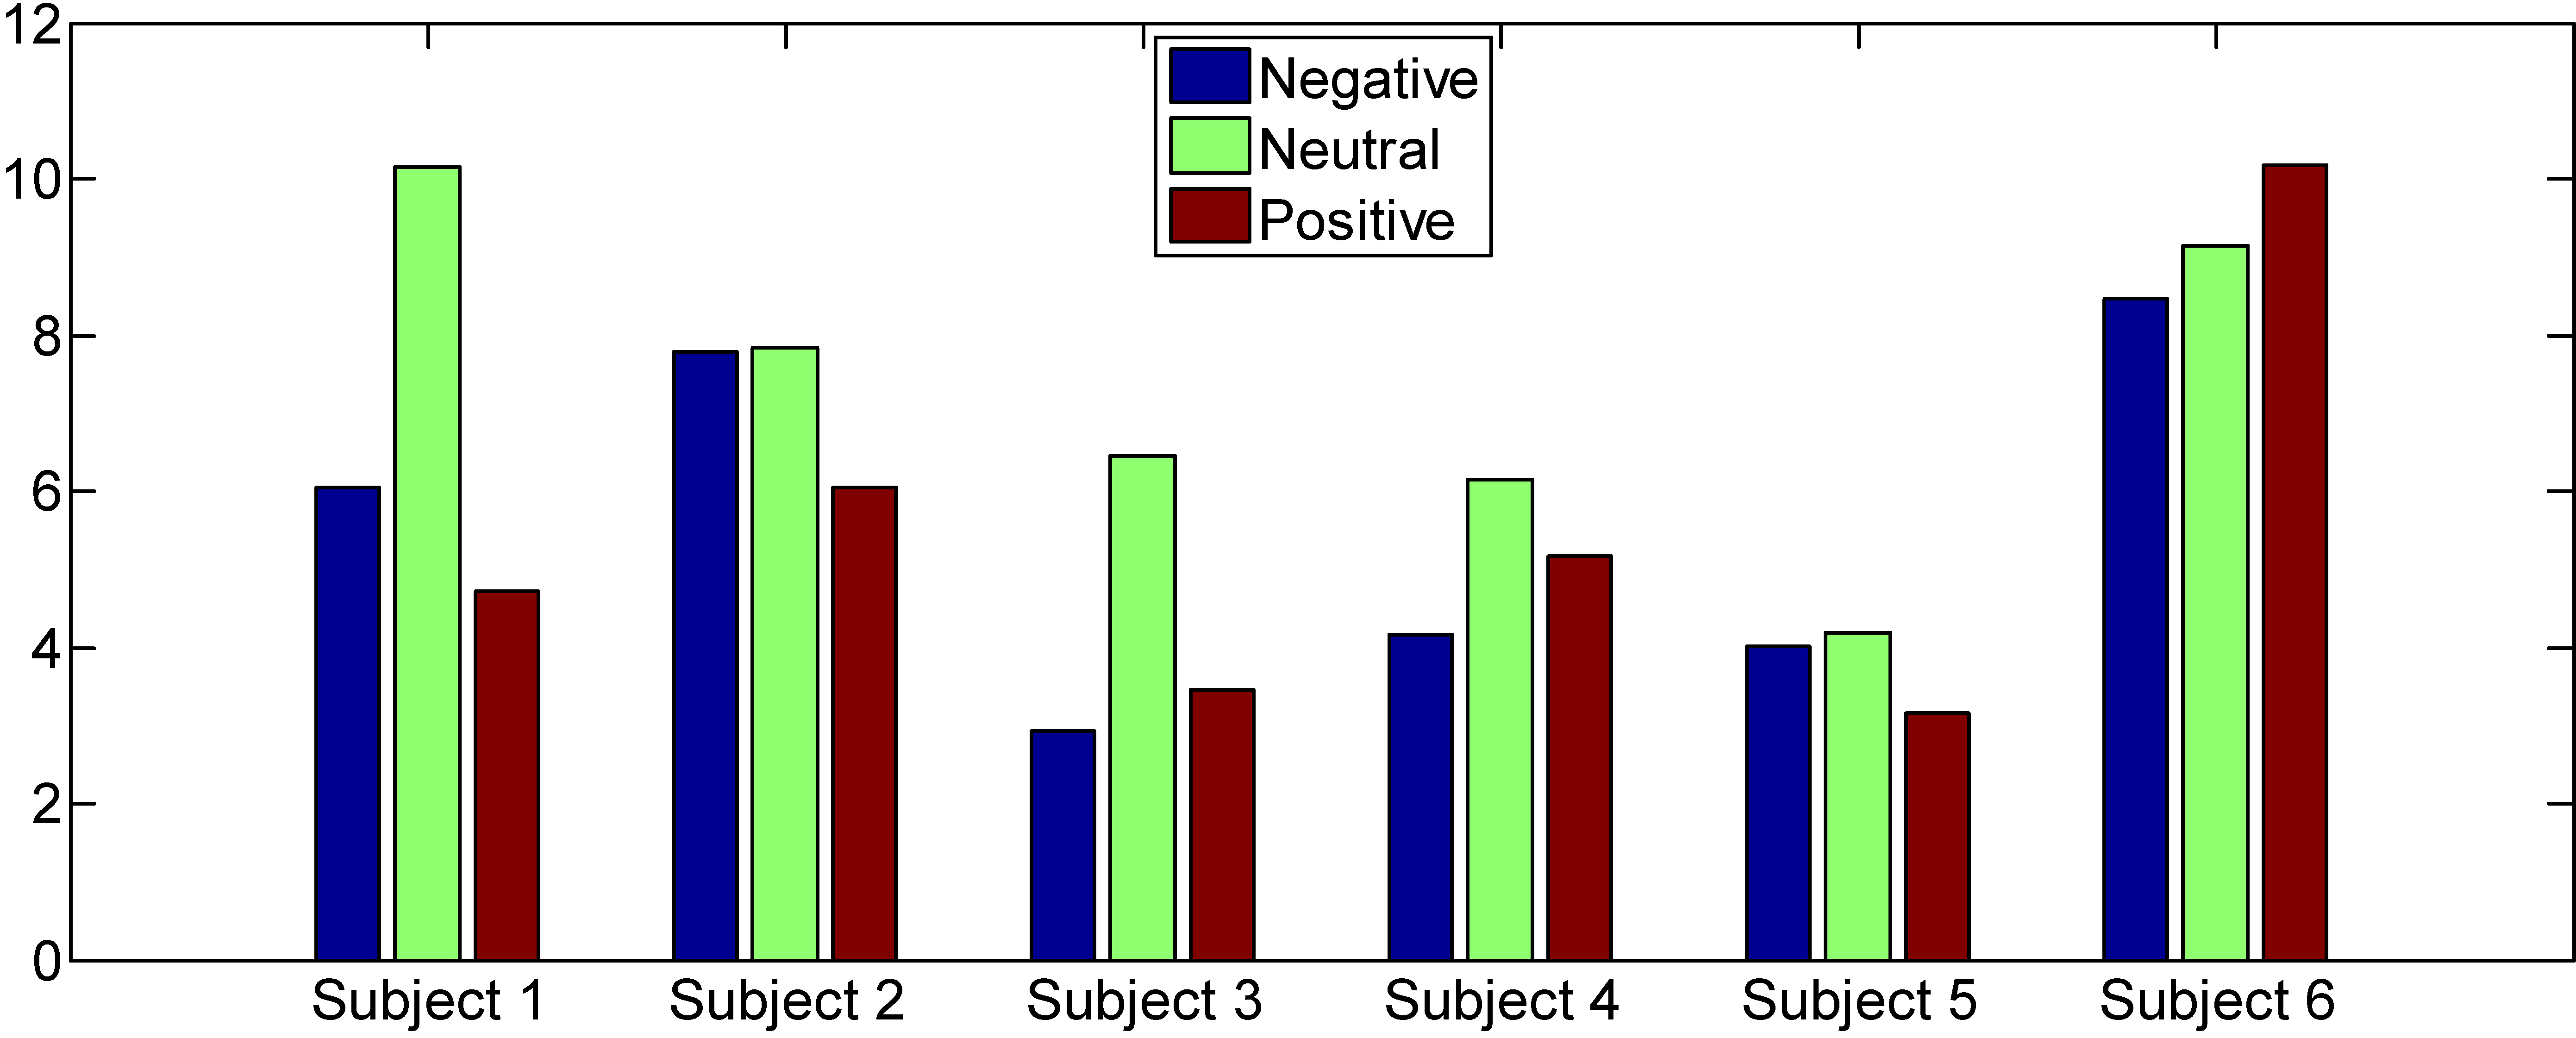 Pstd average values in different emotions.